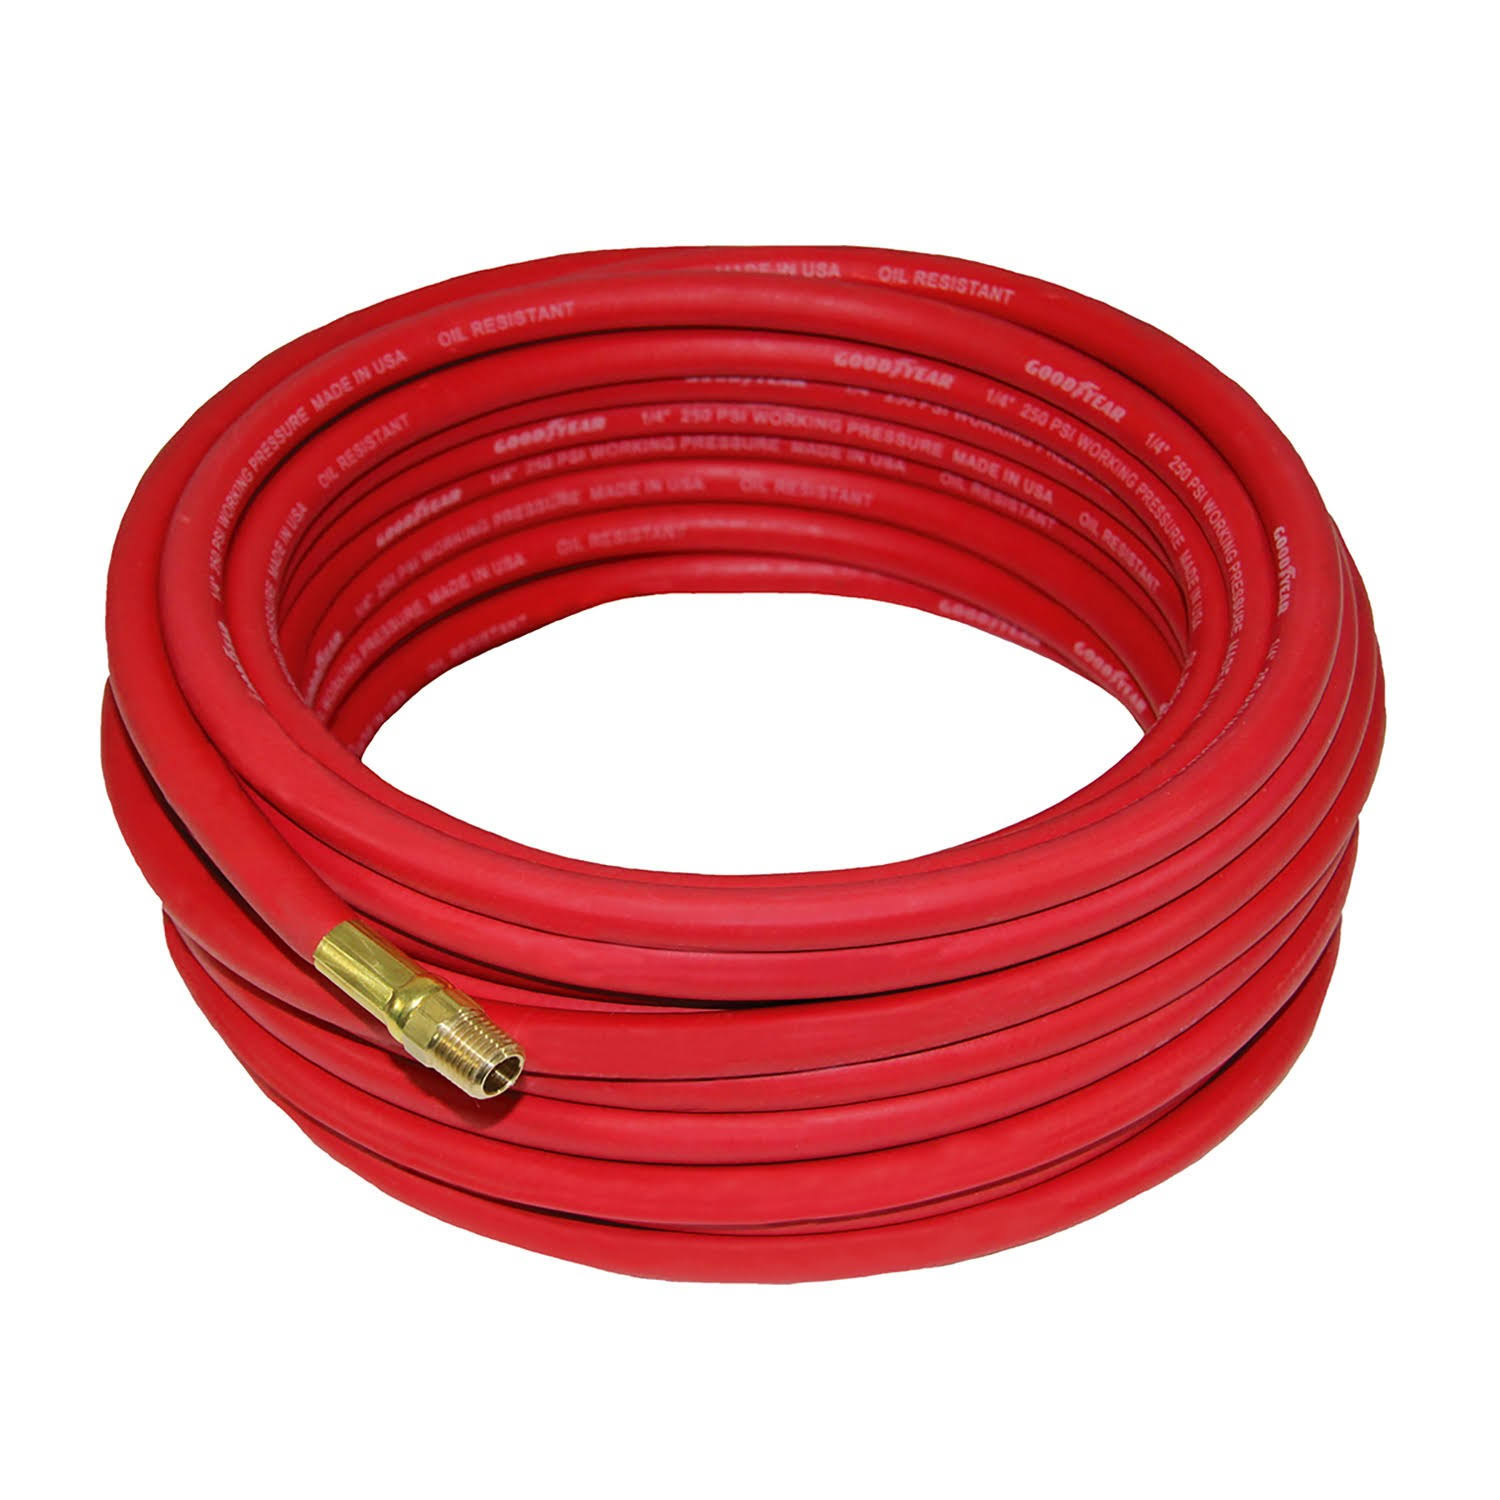 Goodyear Rubber Air Hose - 1/4" x 50', 250 PSI, Red